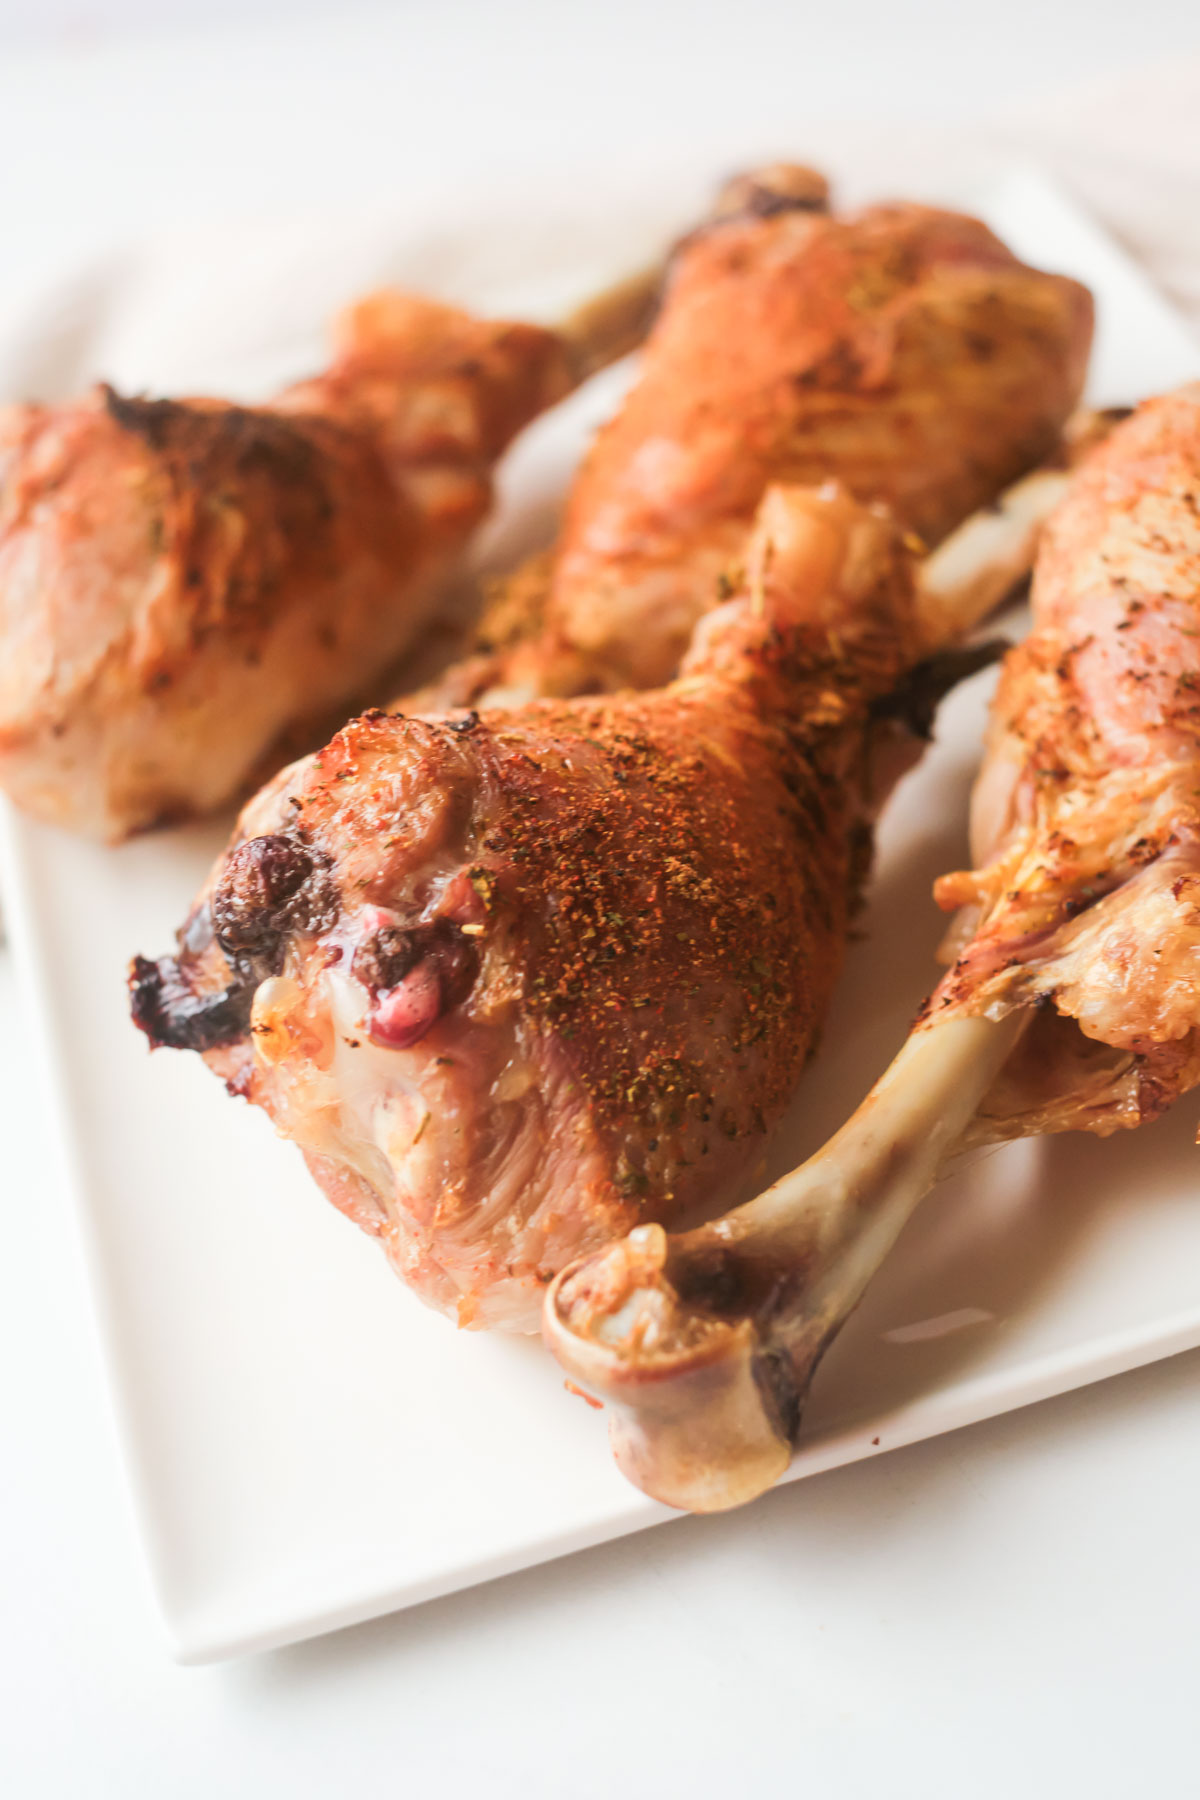 the completed air fryer turkey legs recipe